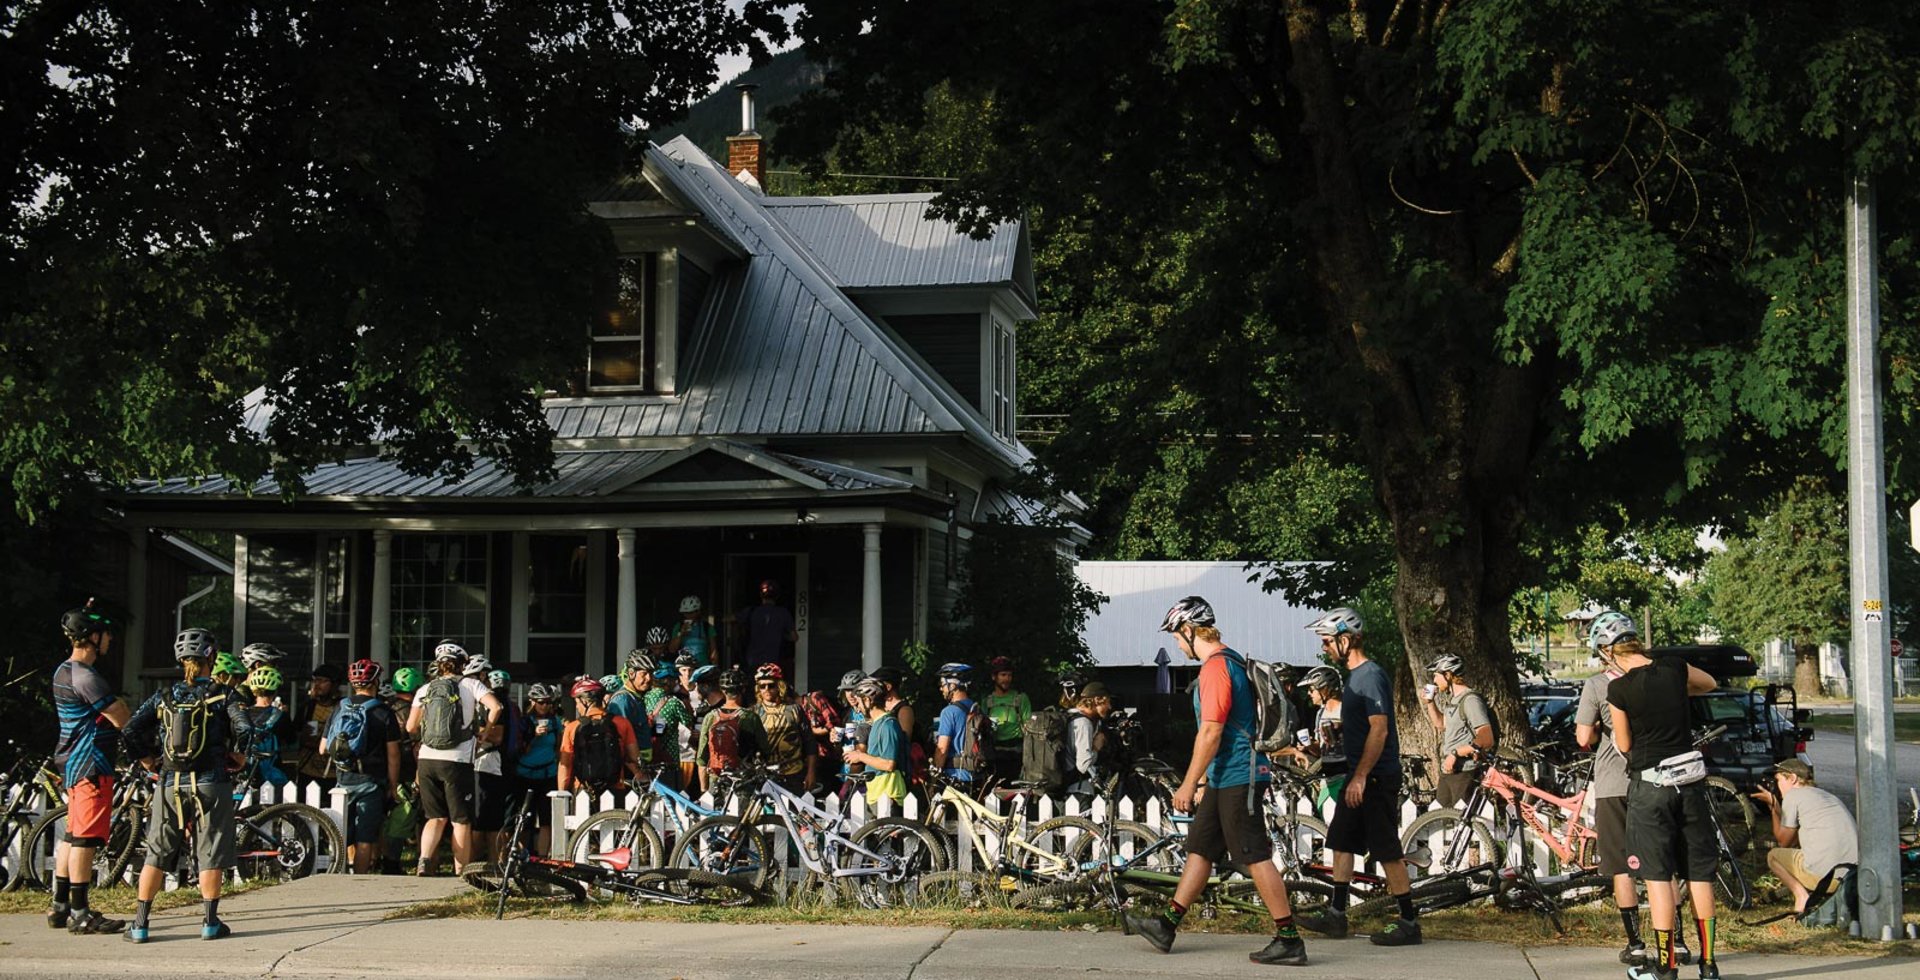 Mojito bars aren’t a typical stop on Pedal and Pint rides, but they’re always a good idea. Riders enjoy some free refreshments at the house of Karl Guillote, a recent Revelstoke resident and Pedal and Pint regular.